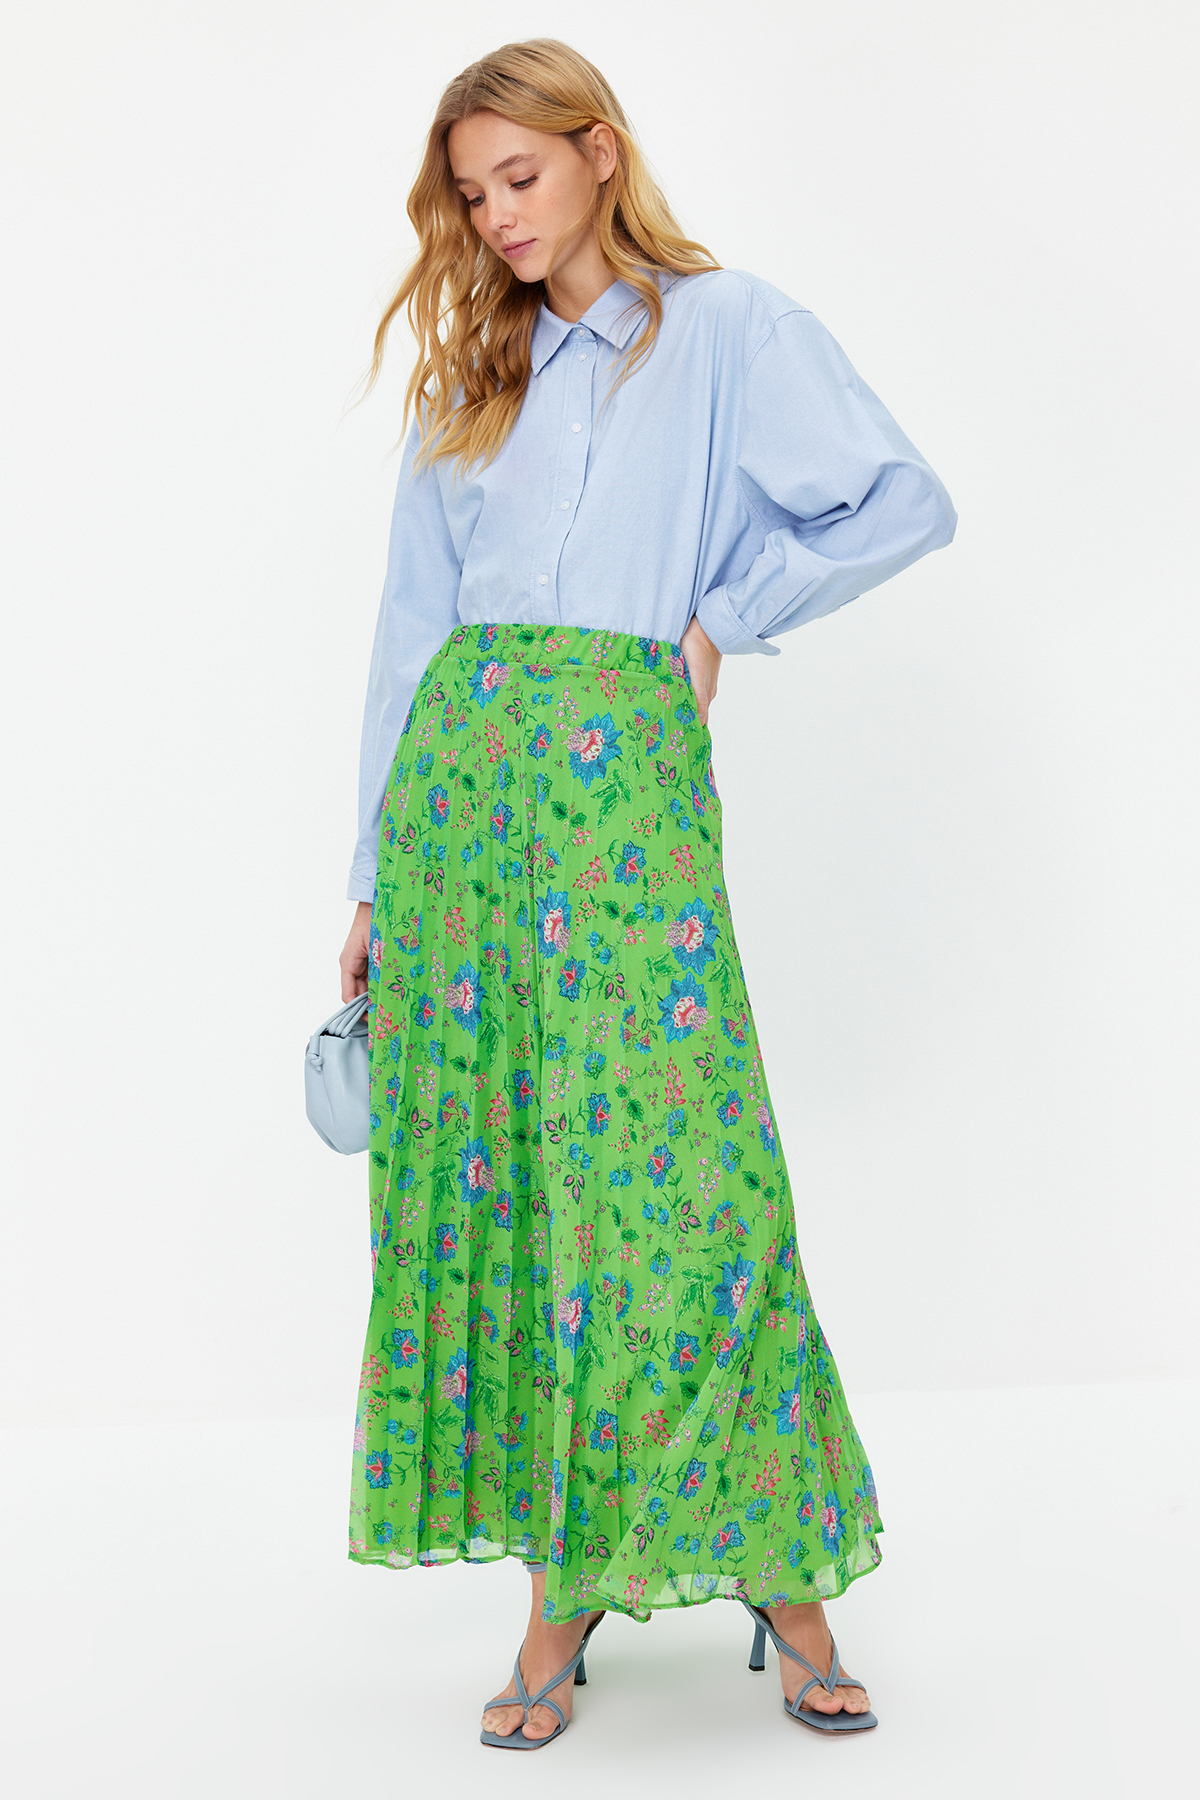 Trendyol Green Pleated Floral Patterned Lined Chiffon Woven Skirt